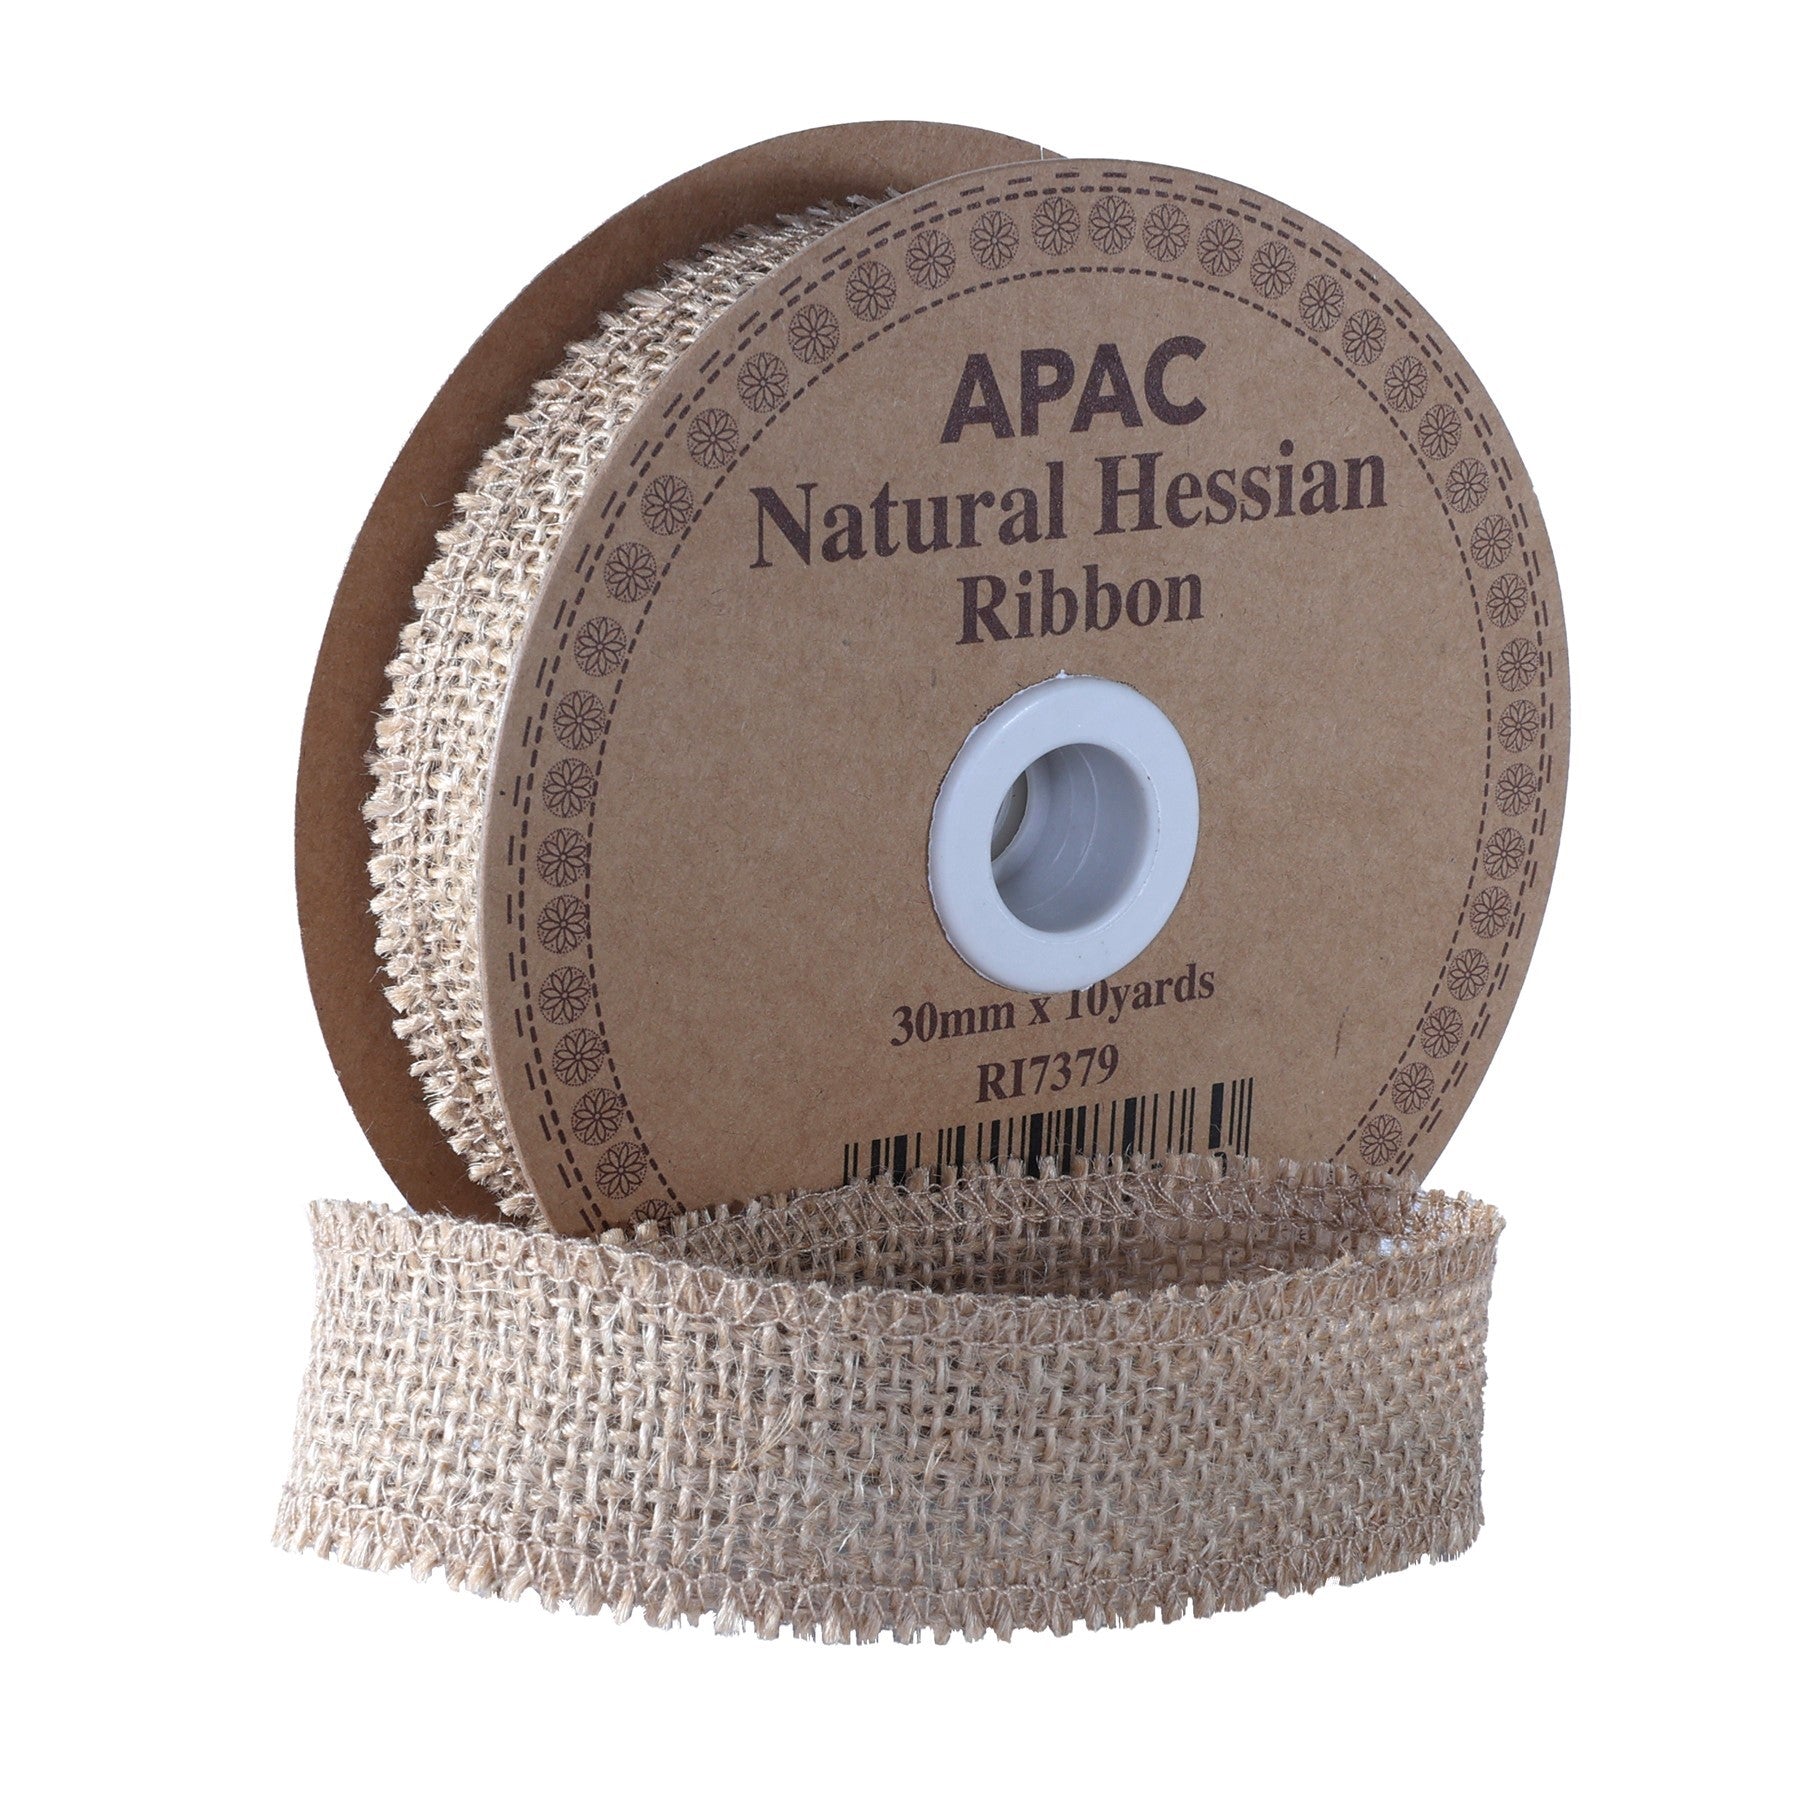 View Natural Hessian 30mm x 10 yards information